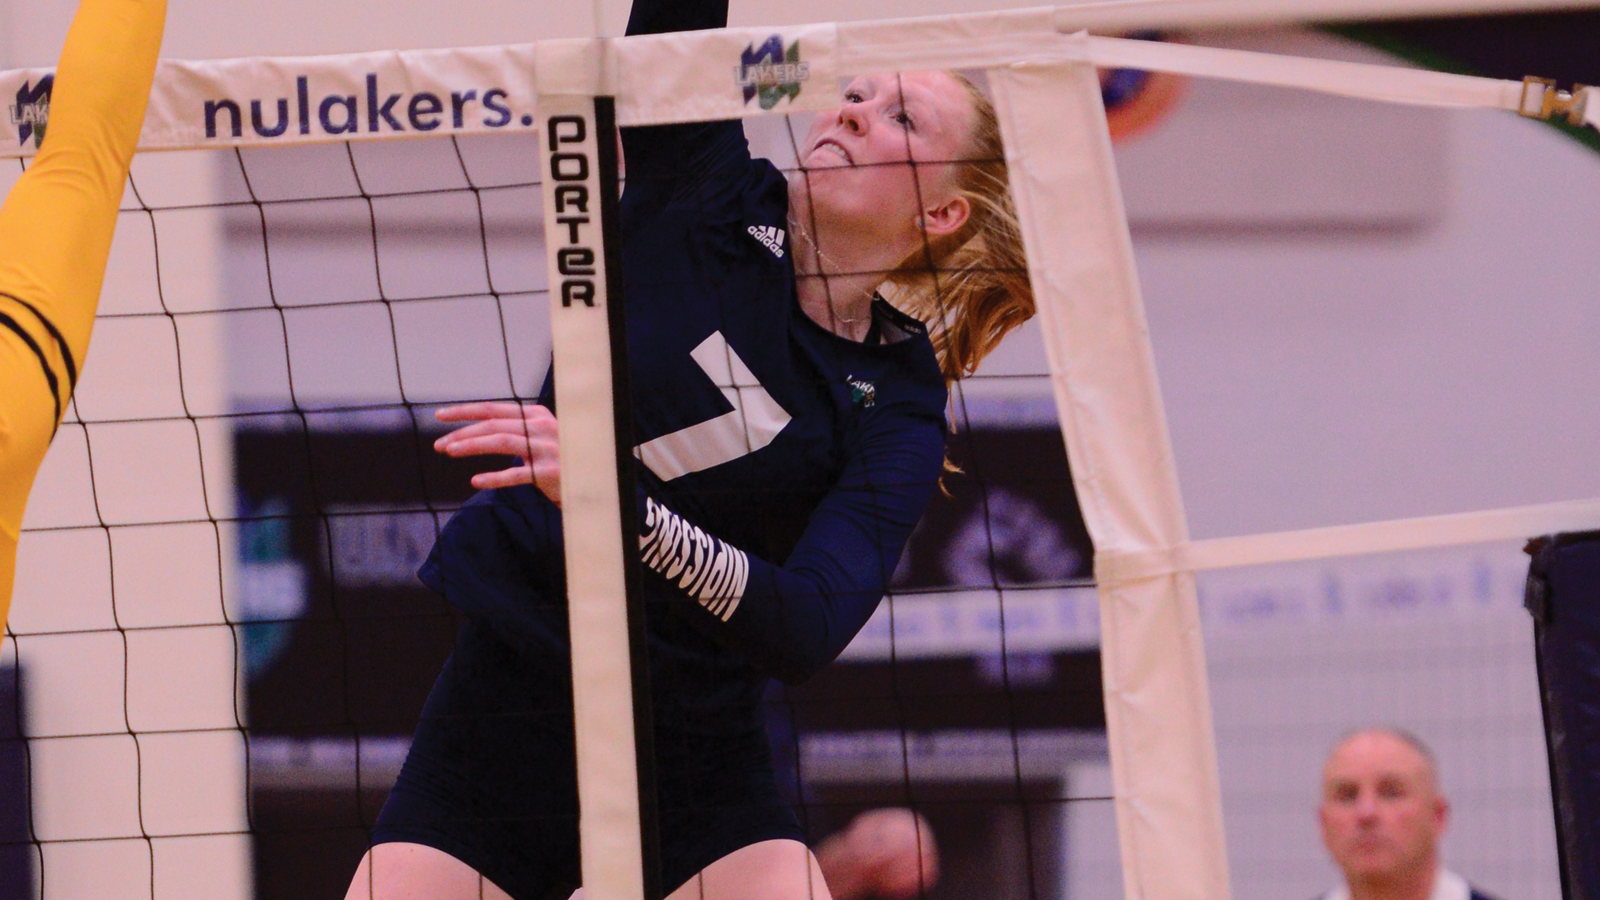 Nipissing women's volleyball player Paige Owen hitting the ball with the net in front of her and the arm of an opposing player going for a block